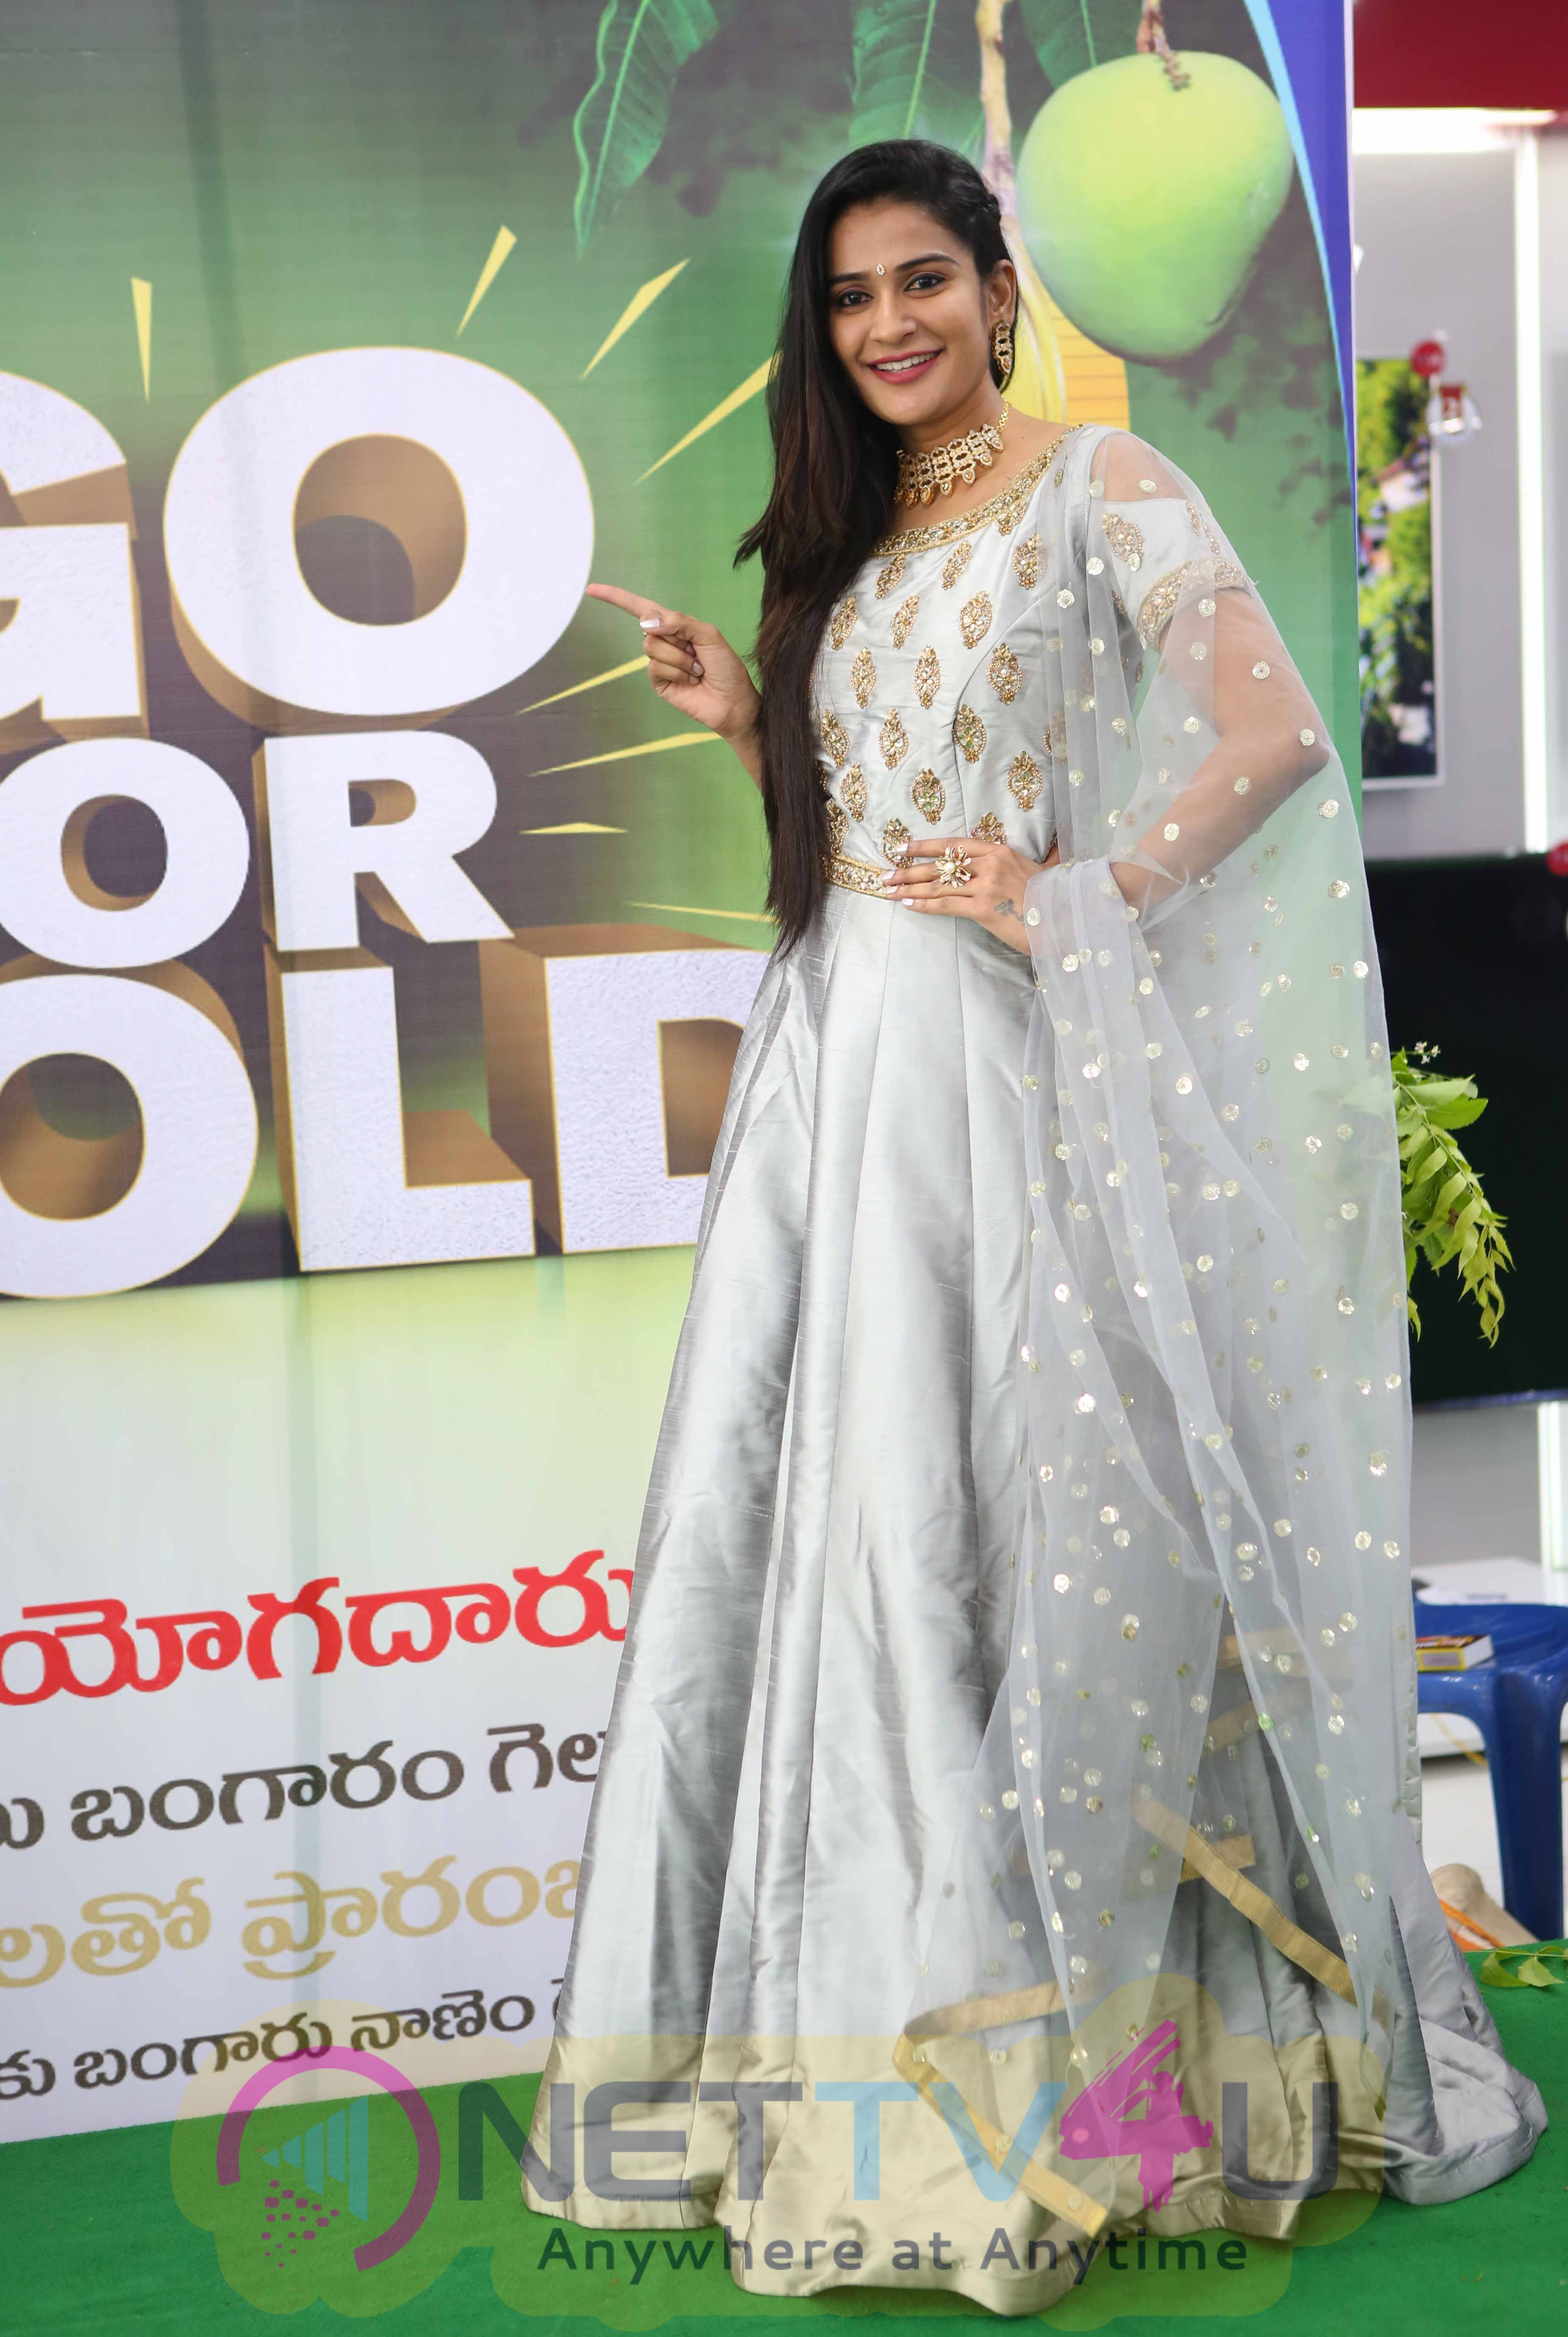 Actress Sita Narayan - Actress Jenny Honey Joins Ugadi Celebrations At The Launch Of Go For Gold Offer At Great Eastern Electron